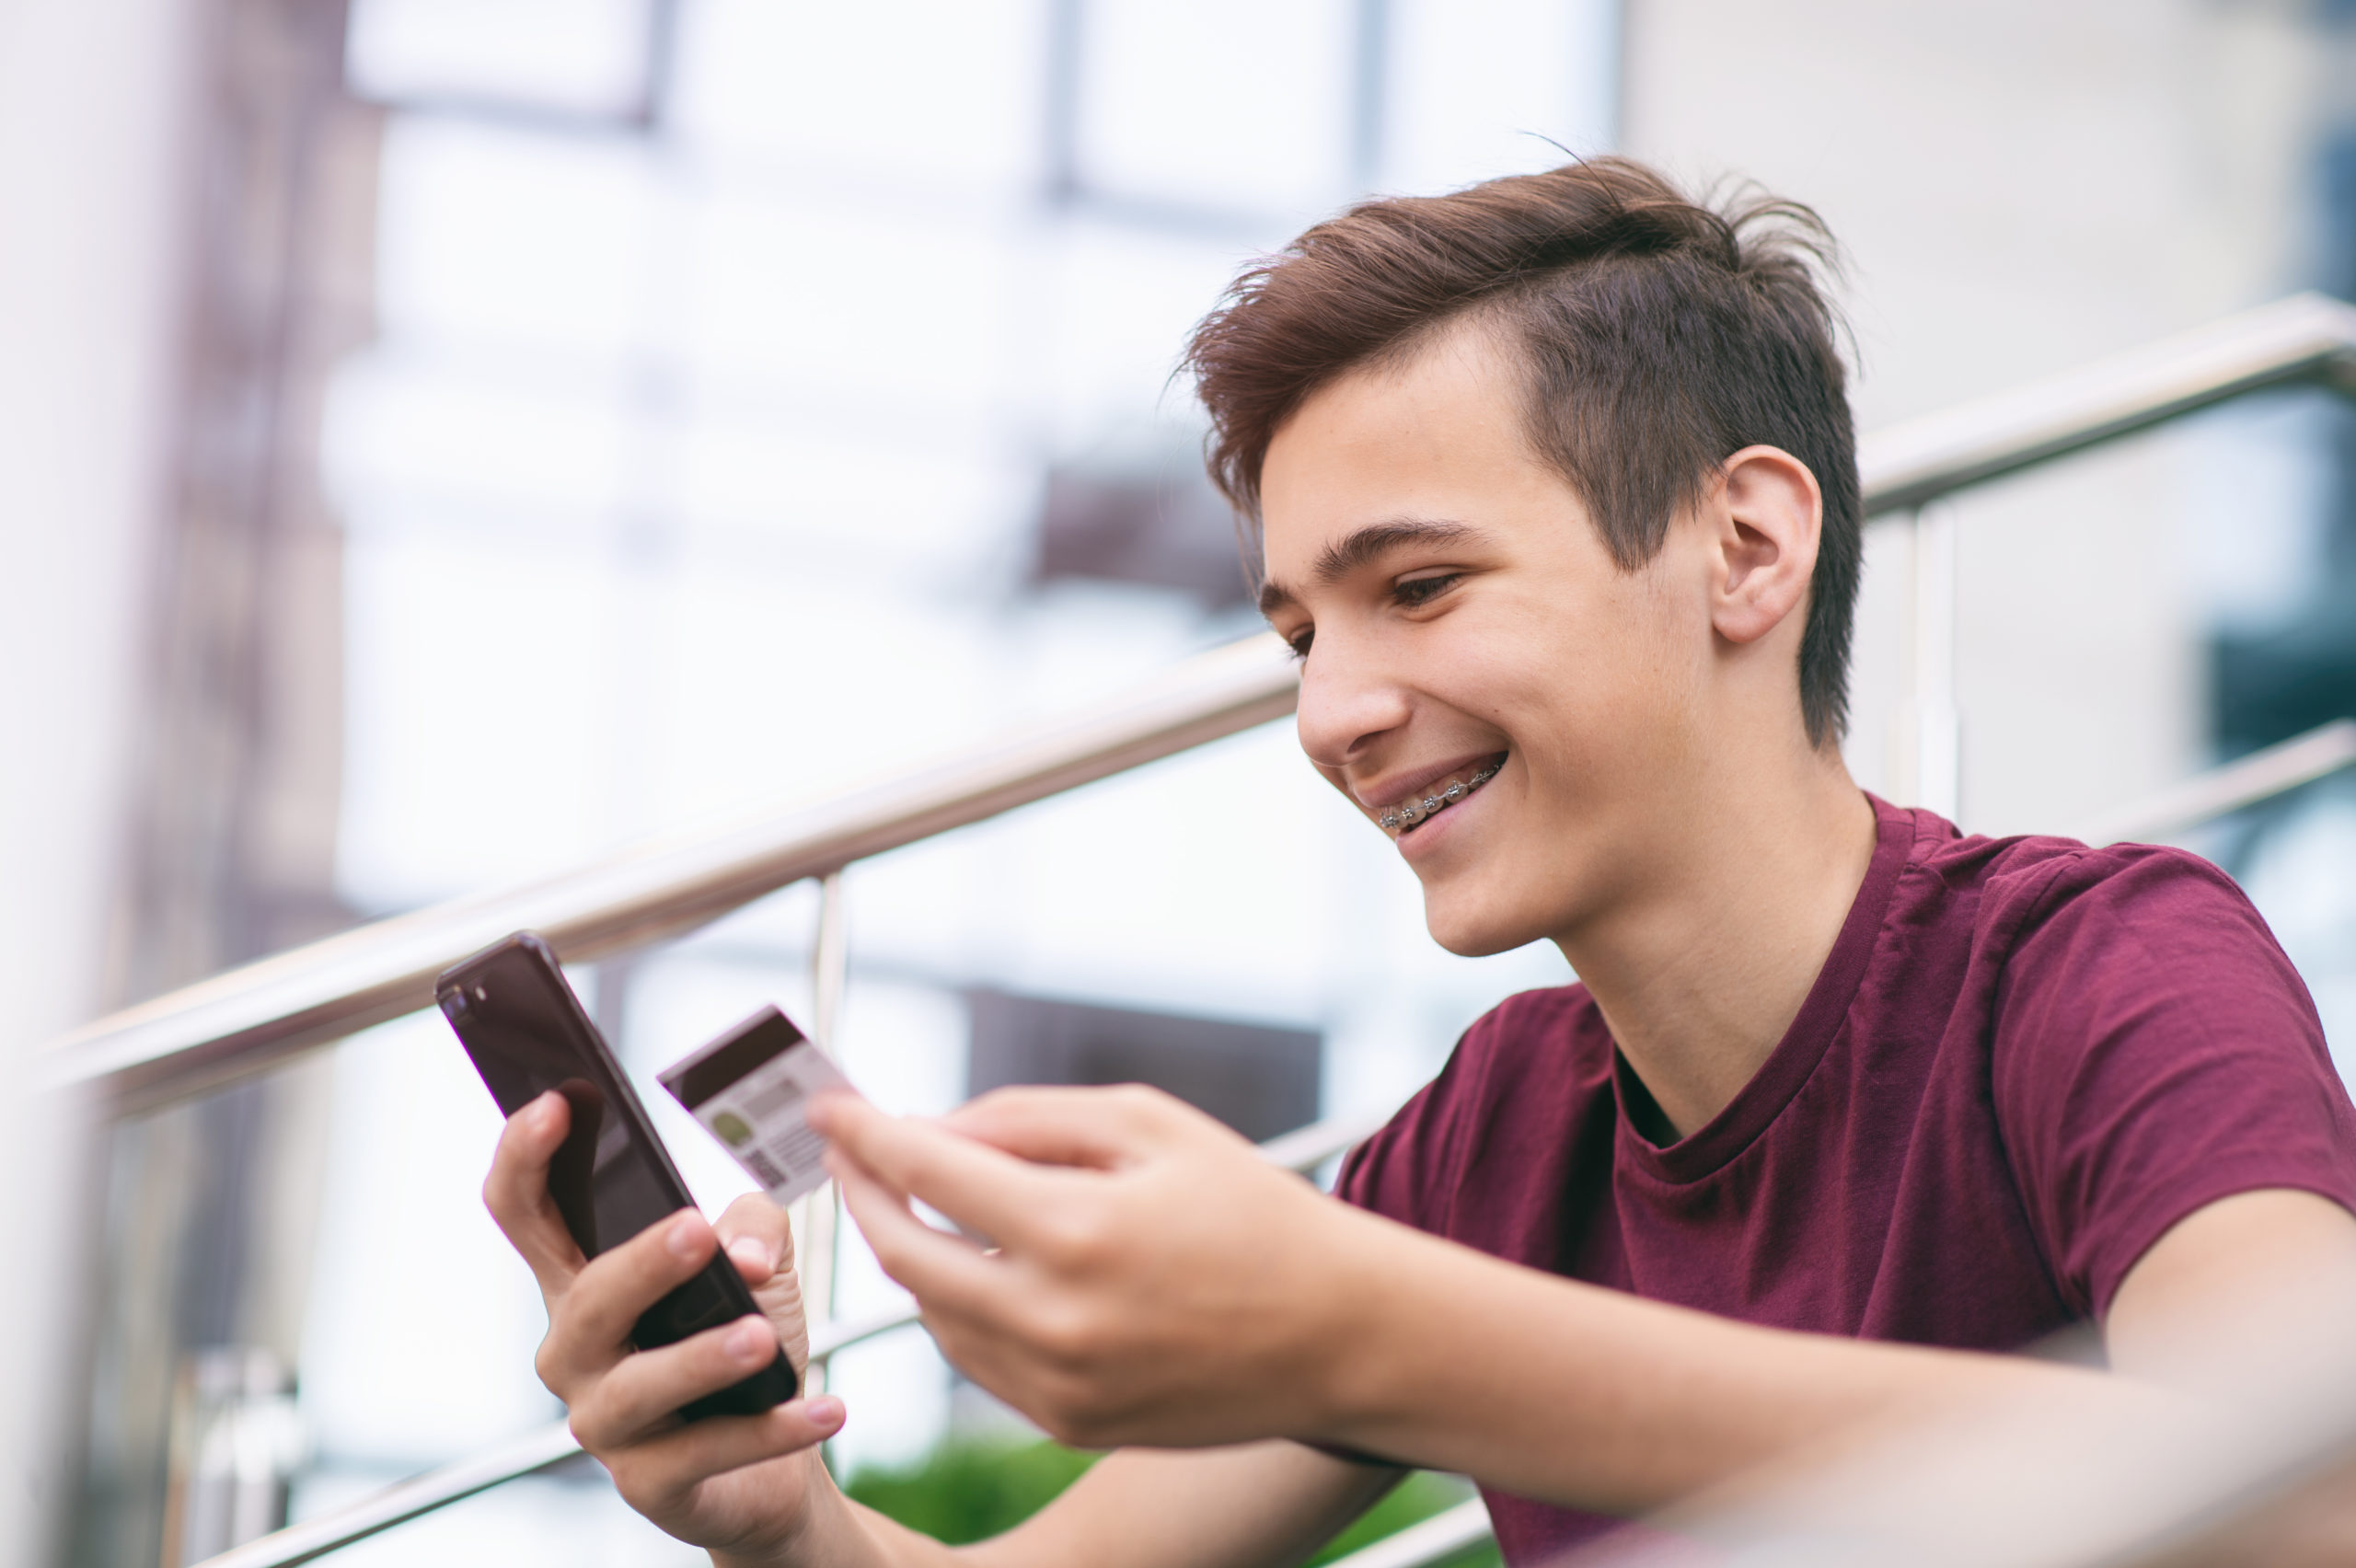 Teenage boy with a credit card and mobile phone makes purchasing